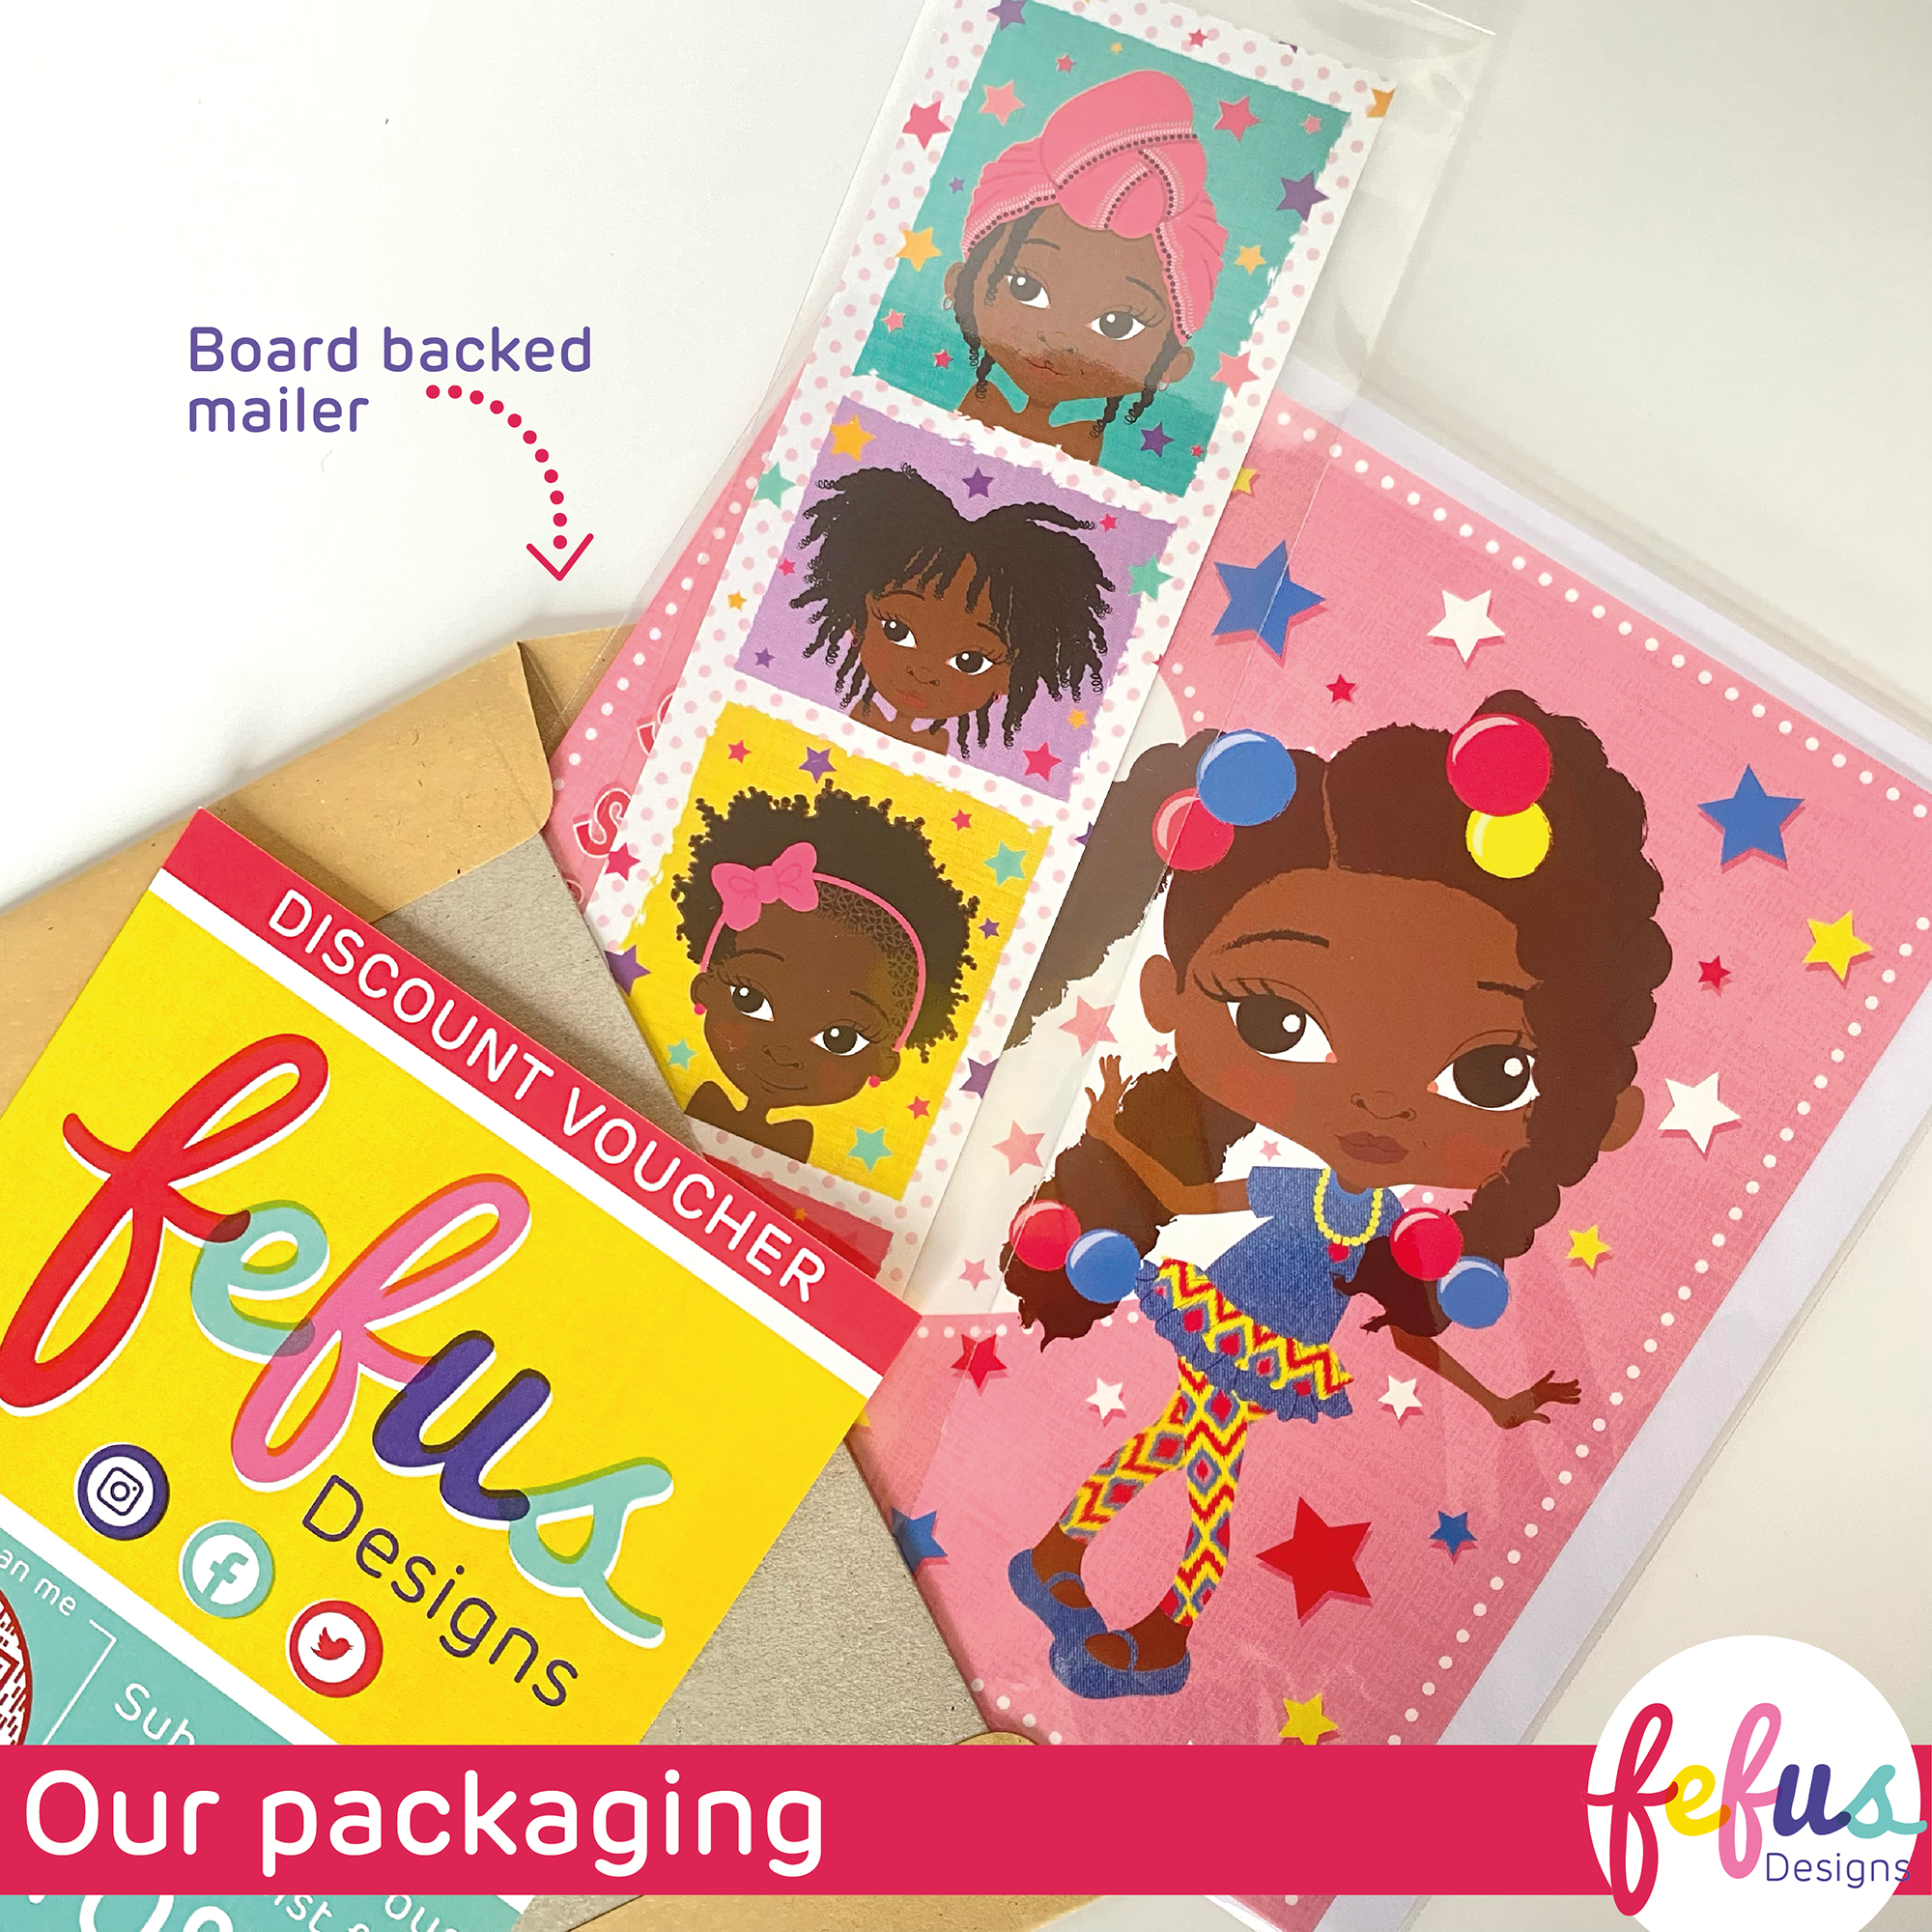 Ayana - Afro Puff Girl - Mixed Race Birthday Card | Fefus designs